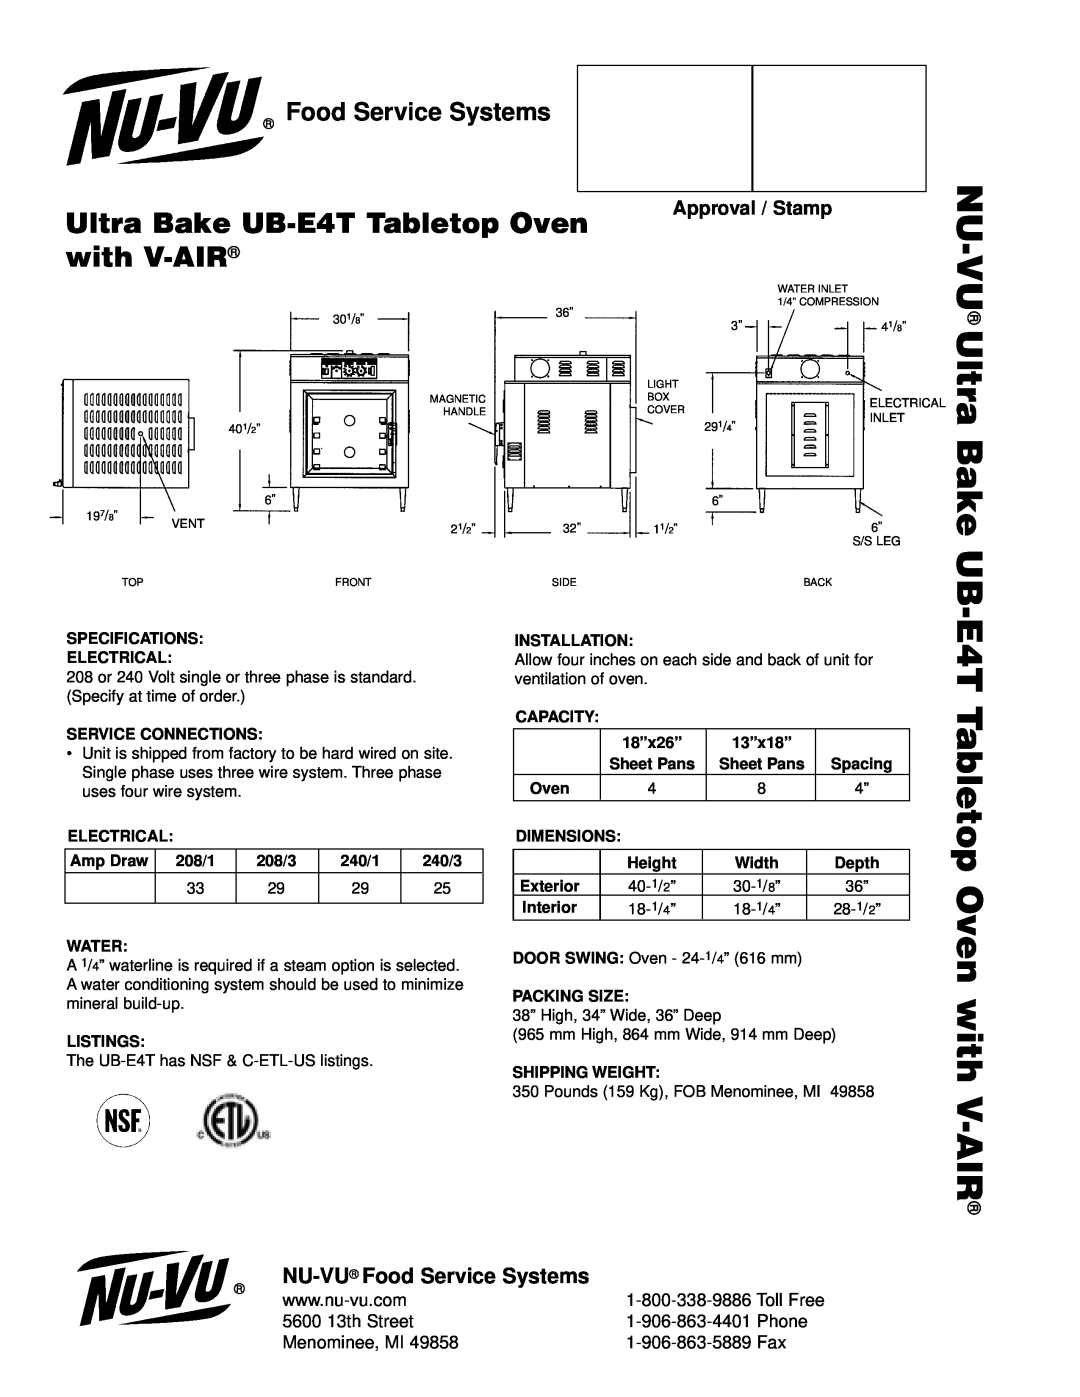 Middleby Cooking Systems Group UB-E4T manual NU-VU Ultra, E4T Tabletop Oven with V-AIR, Bake, Food Service Systems, Phone 